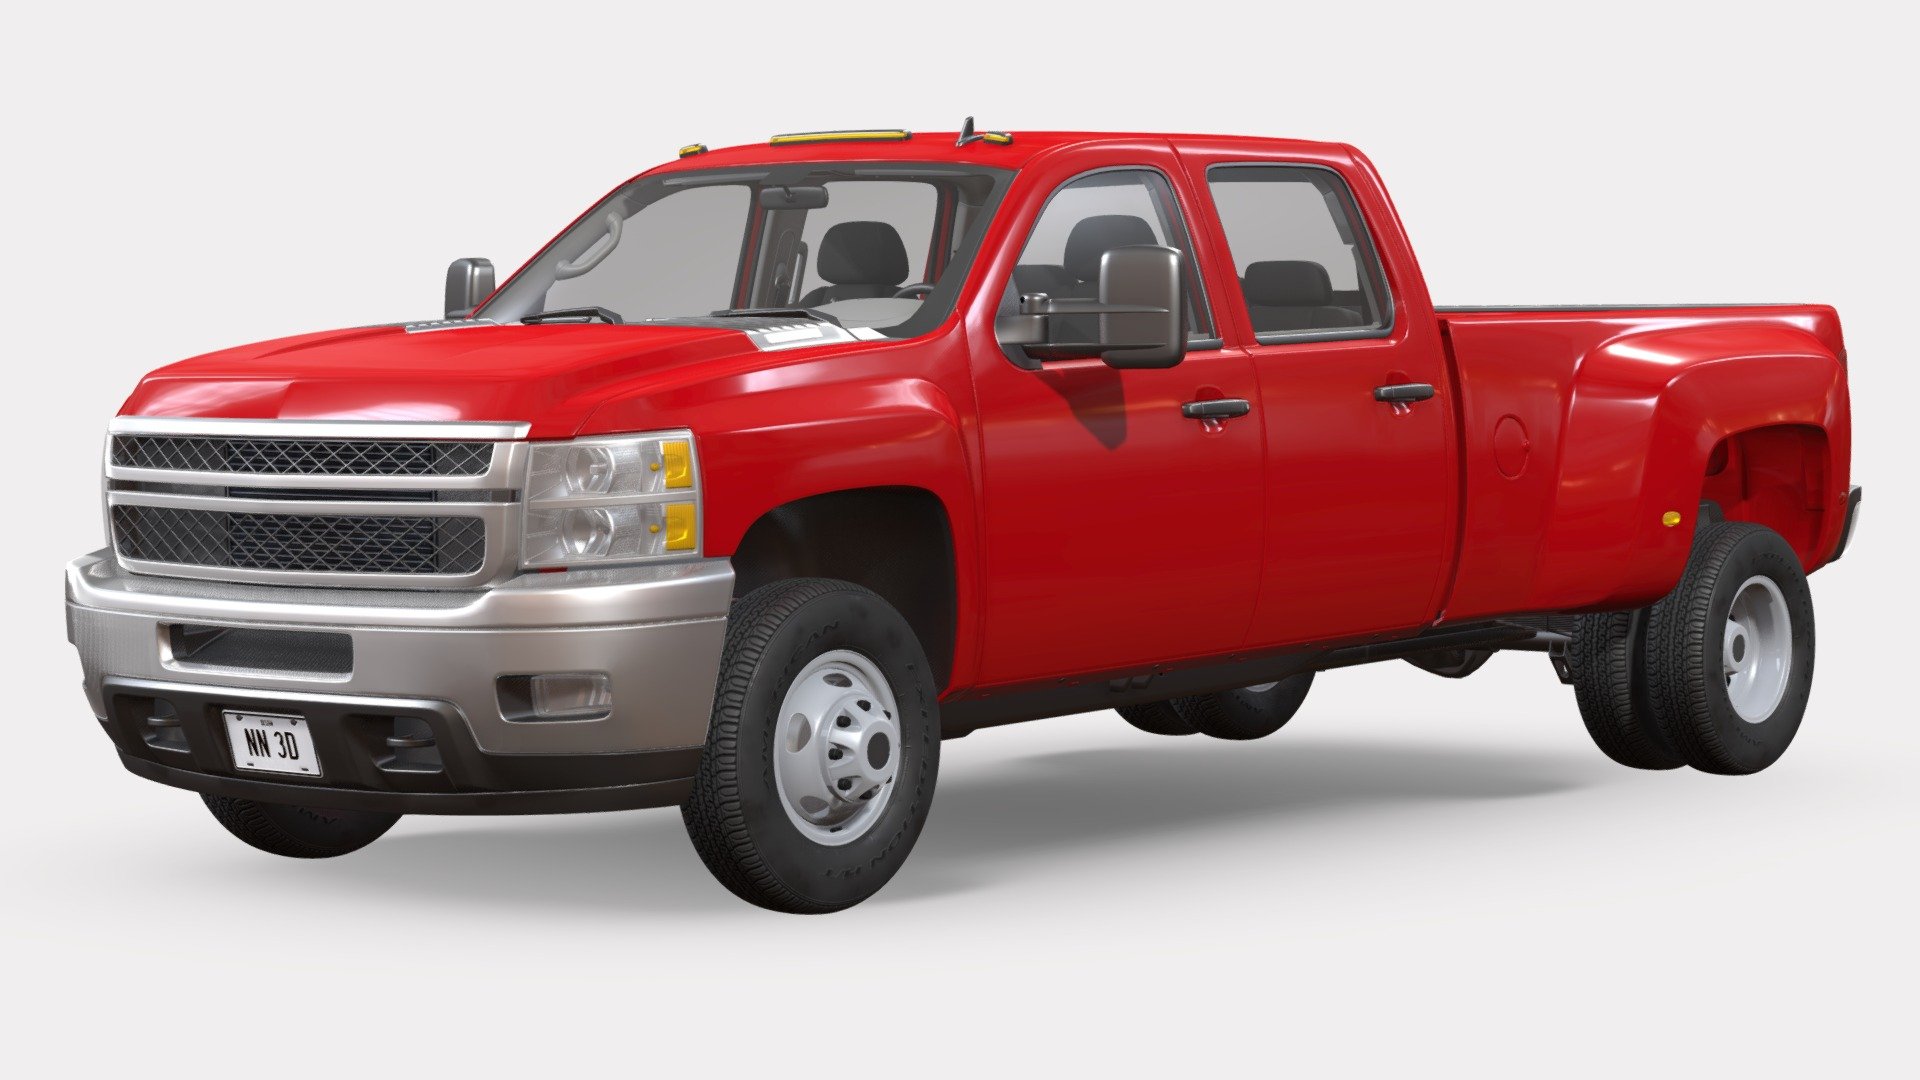 NN 3D store.

3D model of a modern dually crew cab pickup truck.

The truck's high detail exterior is great for close up renders, the cabin, chassis and drivetrain have been extensively detailed for close range shots.

The model was created with 3DS Max 2016 using the open subdivision modifier which has been left in the stack to adjust the level of detail.

There are also included HI and LO poly versions in Blender format with textures.

Exchange files included: FBX, OBJ and 3DS, all with HI and LO subdivision versions.

SPECIFICATIONS:

The model has 177.000 polygons with subdivision level at 0 and 707.000 at level 1.

Renderer: V Ray.

The model is fully textured and UV mapped with diffuse, bump, roughness and specular maps.

All materials and textures are included and mapped in all files, settings might have to be adjusted depending on the software you are using.

Textures are in JPG format with 4096x4096, 2048x2048 and 512x512 resolution 3d model